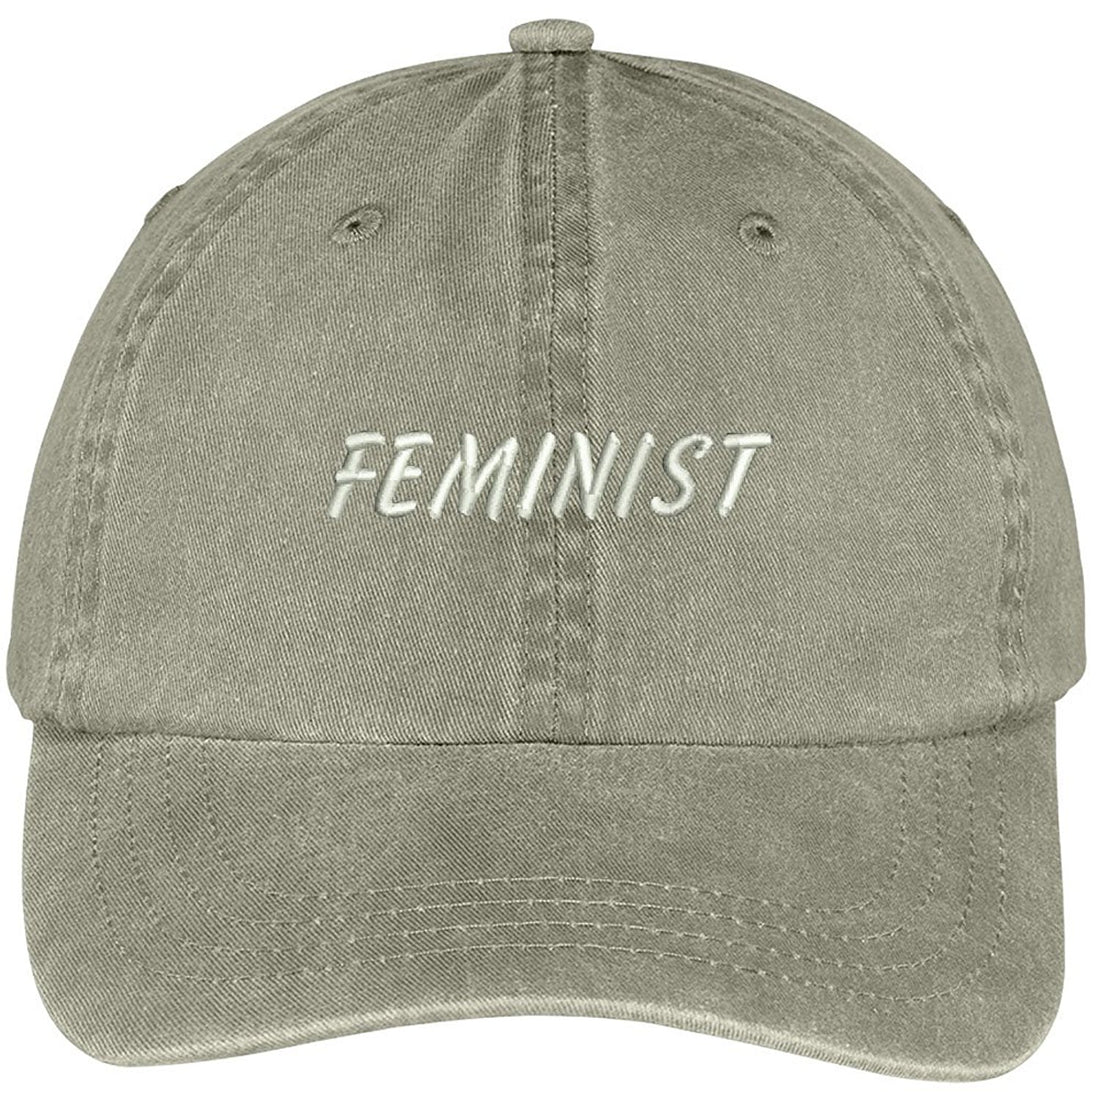 Trendy Apparel Shop Feminist Embroidered Washed Cotton Adjustable Cap